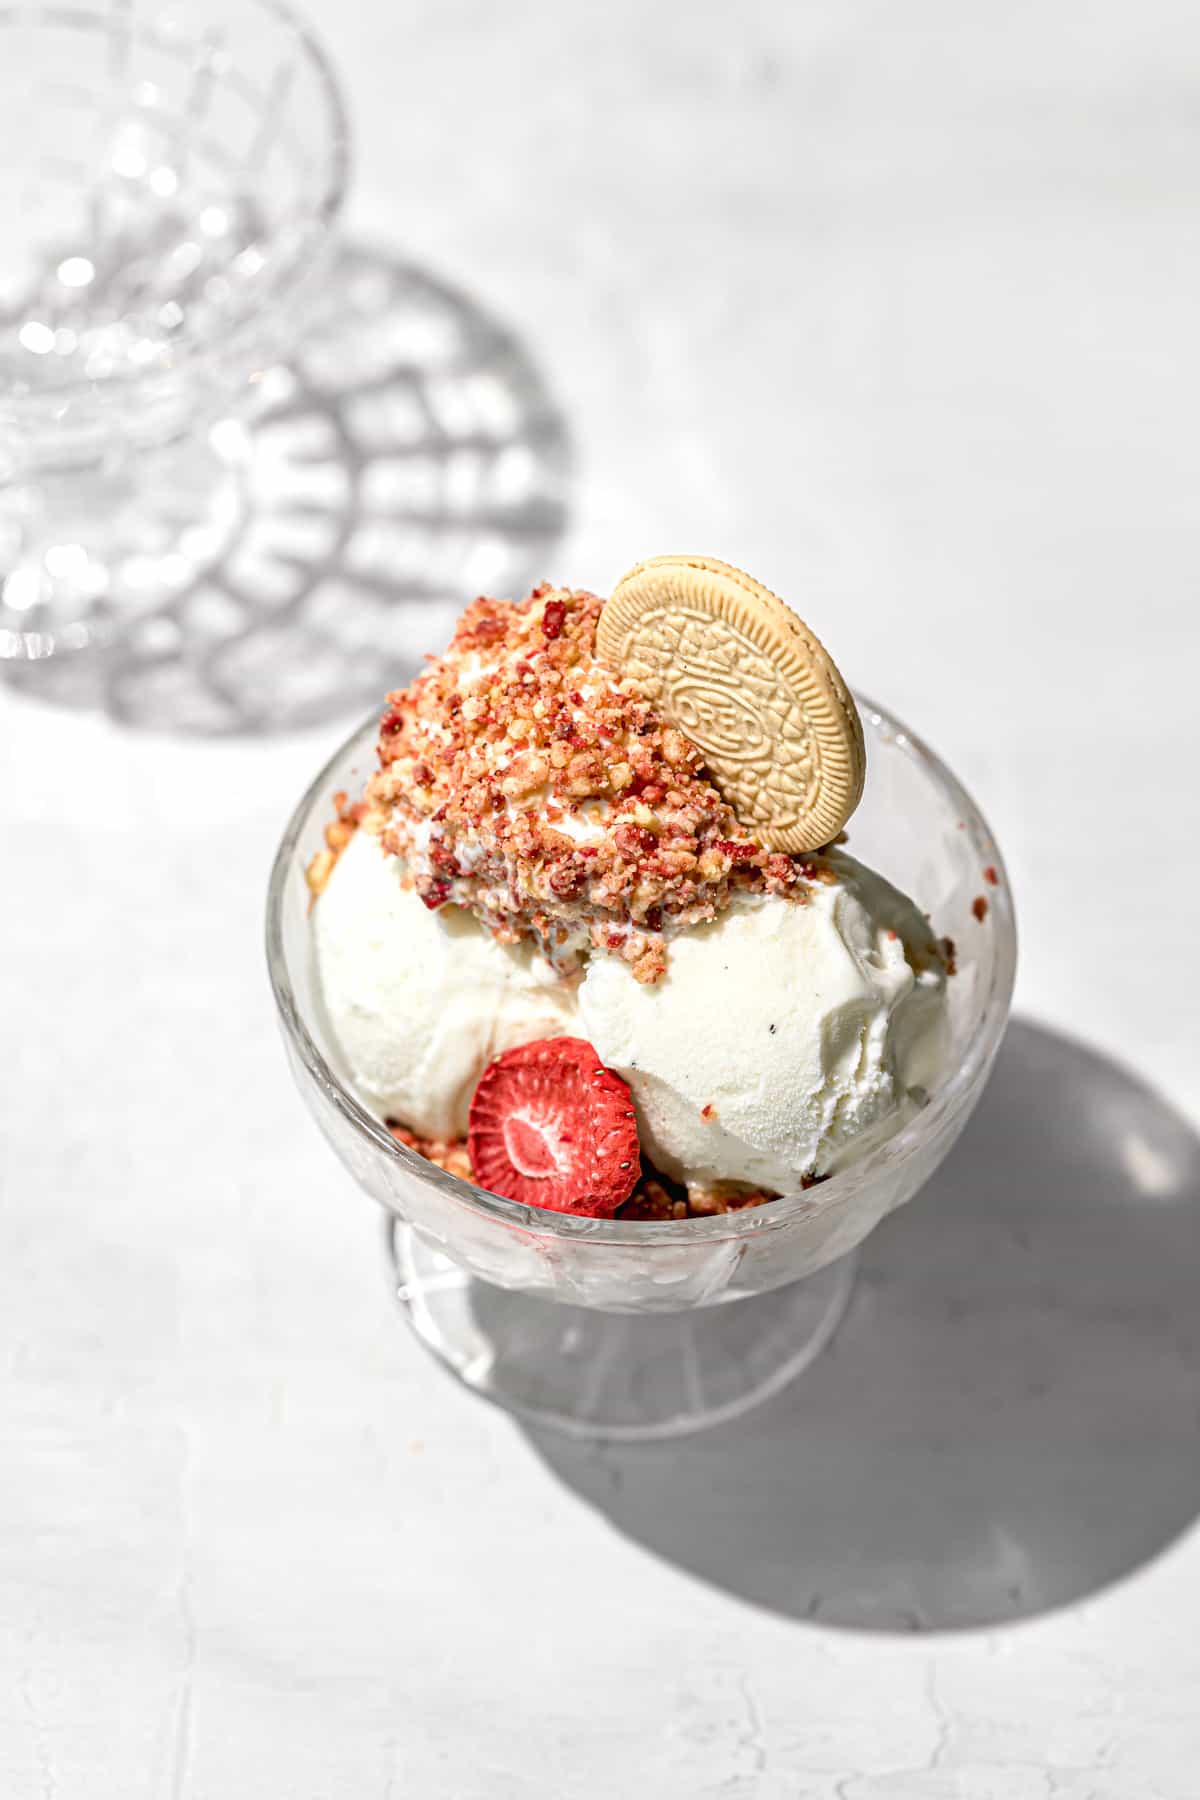 ice cream rolled in strawberry shortcake crumble in glass bowl